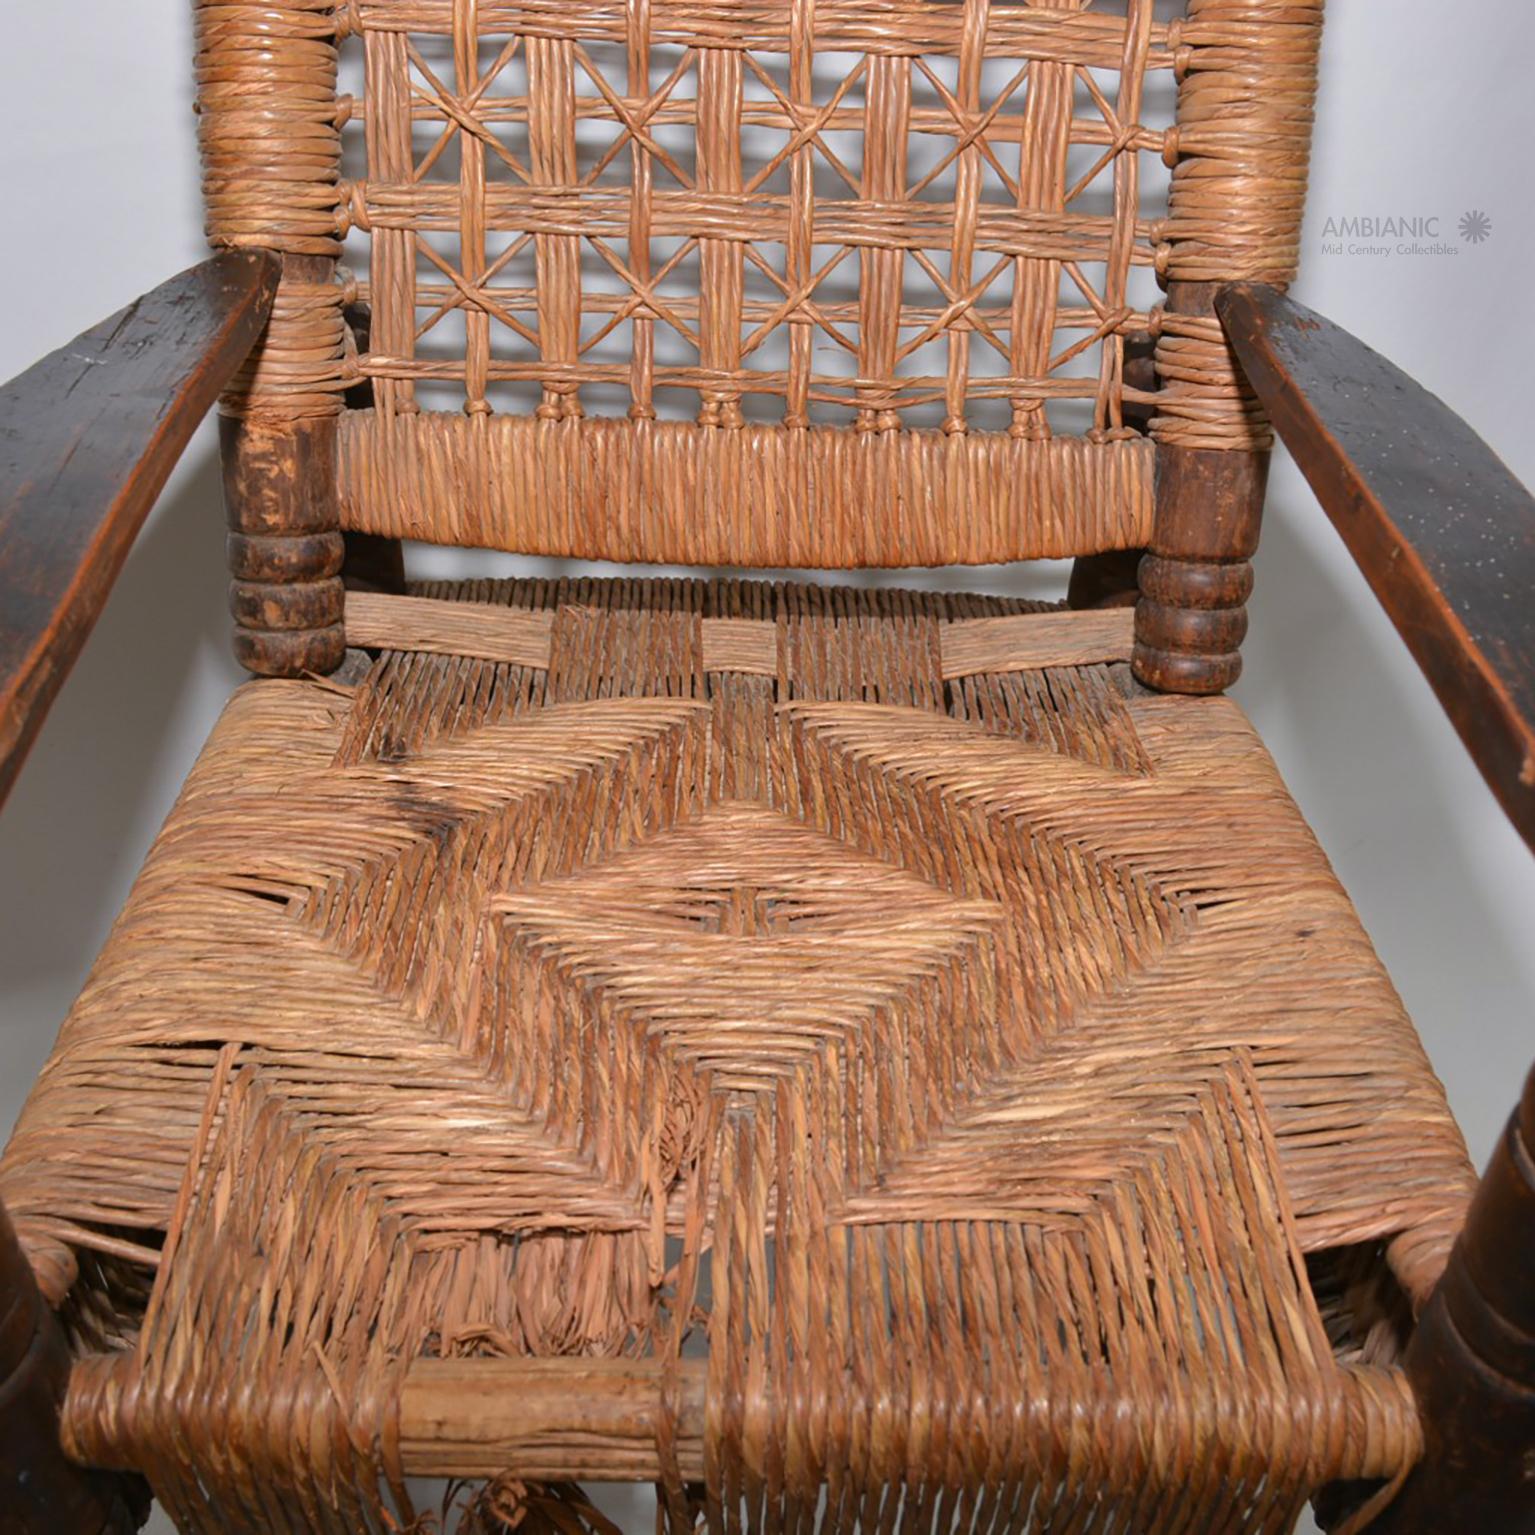 Mid-20th Century Antique Children's Rocking Chair Wood and Wicker Seagrass Armchair Rocker, 1930s